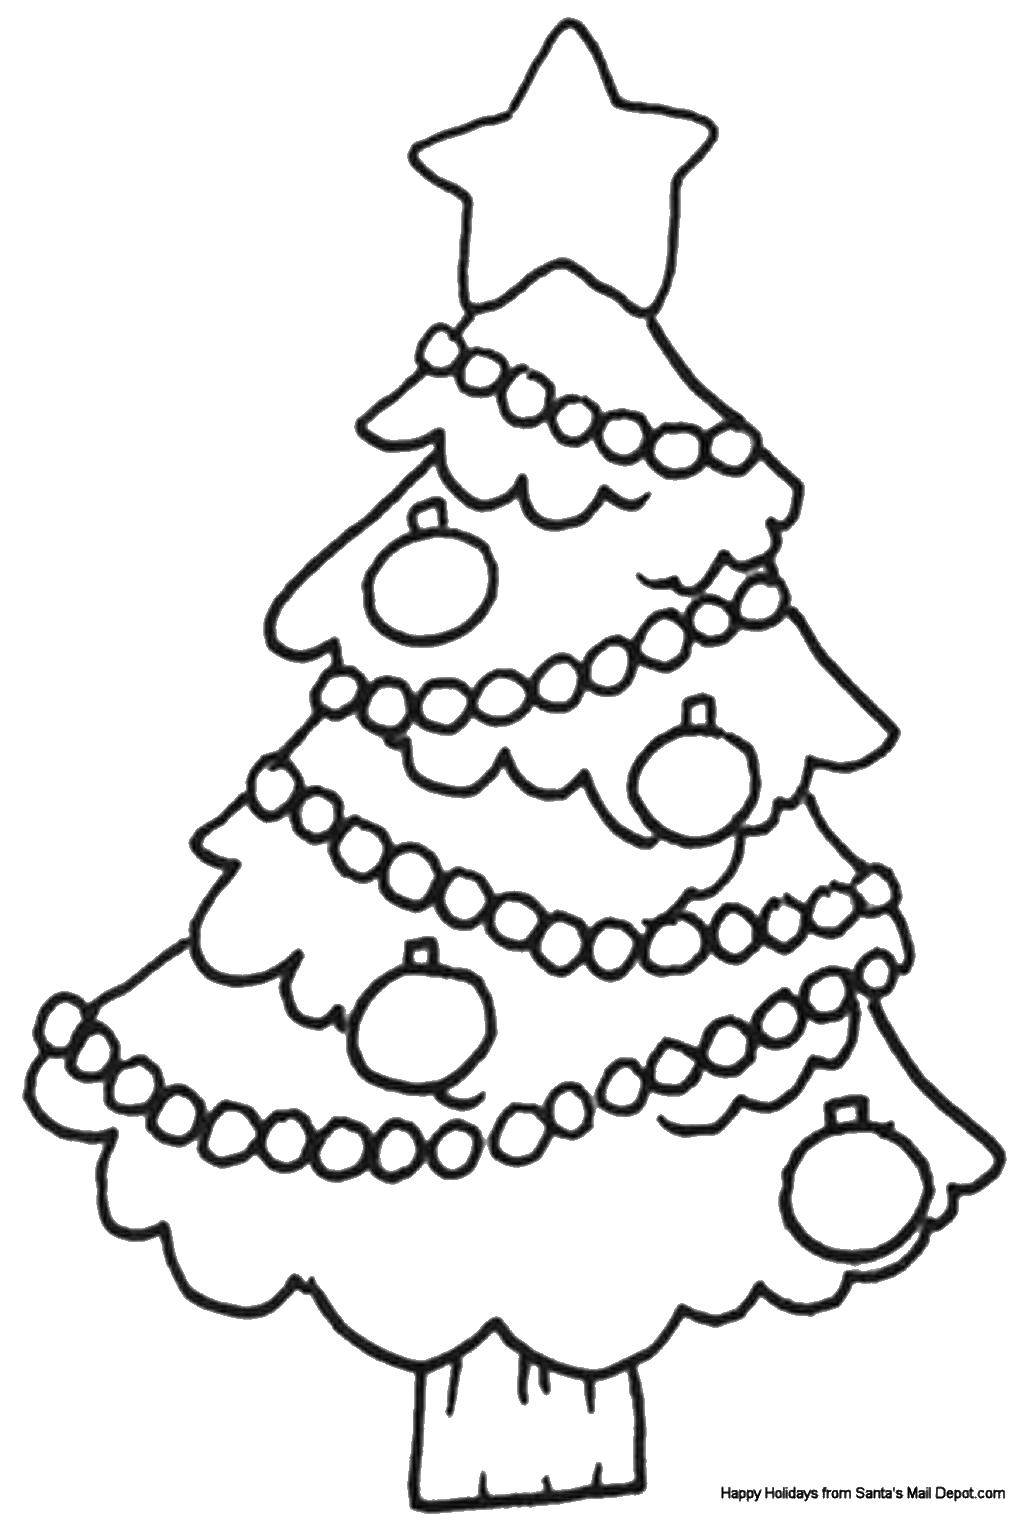 Coloring The Christmas tree toys garland. Category Christmas. Tags:  Christmas, Christmas toy, Christmas tree, gifts.